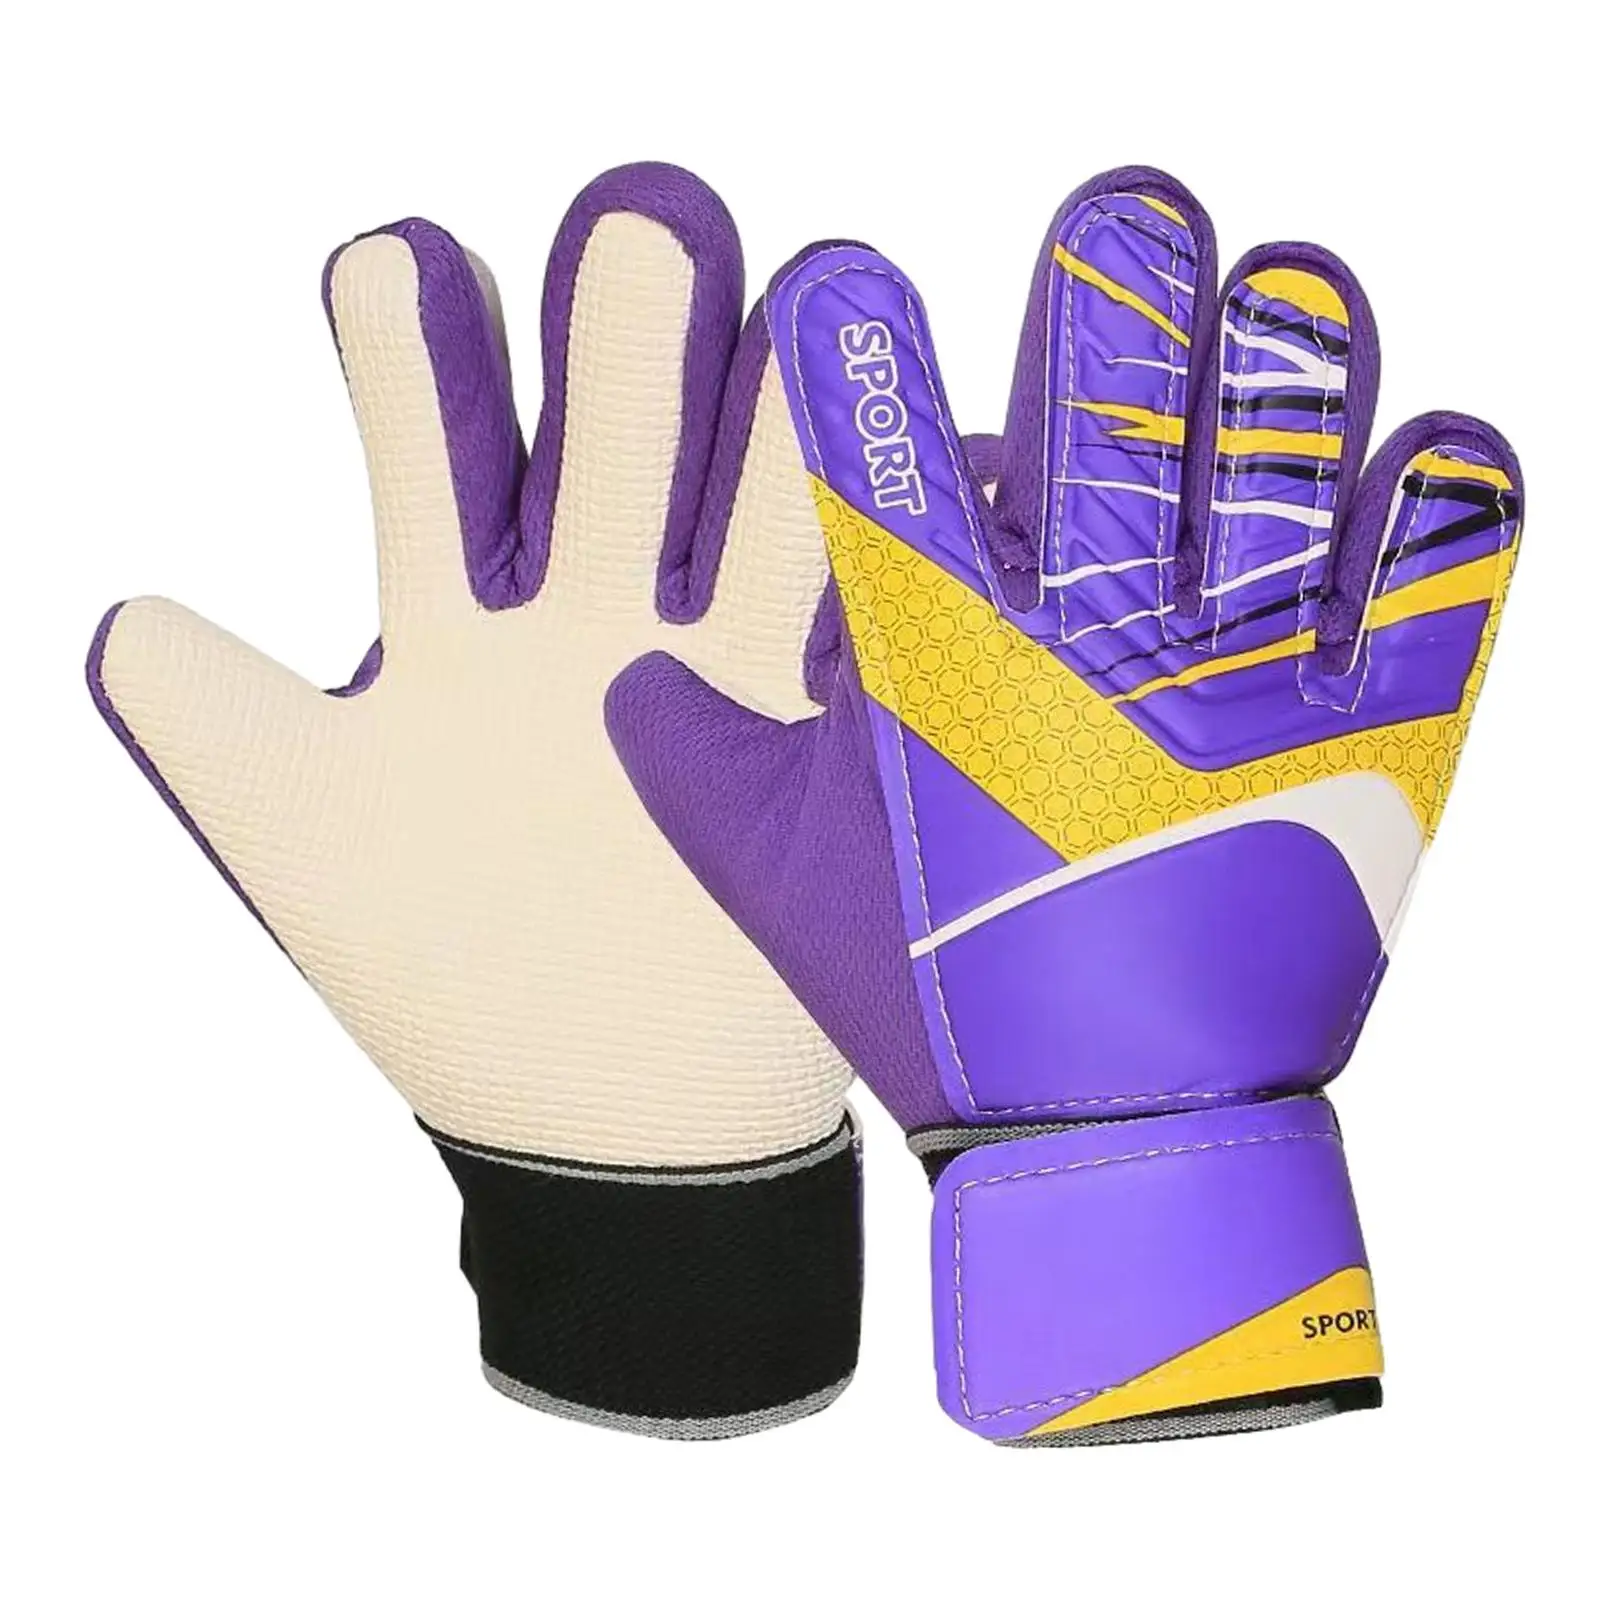 Adult Football Goalkeeper Gloves Sports Equipment Wear Resistant Protective Strong Grip Stylish Practical Durable Non Slip Mitts